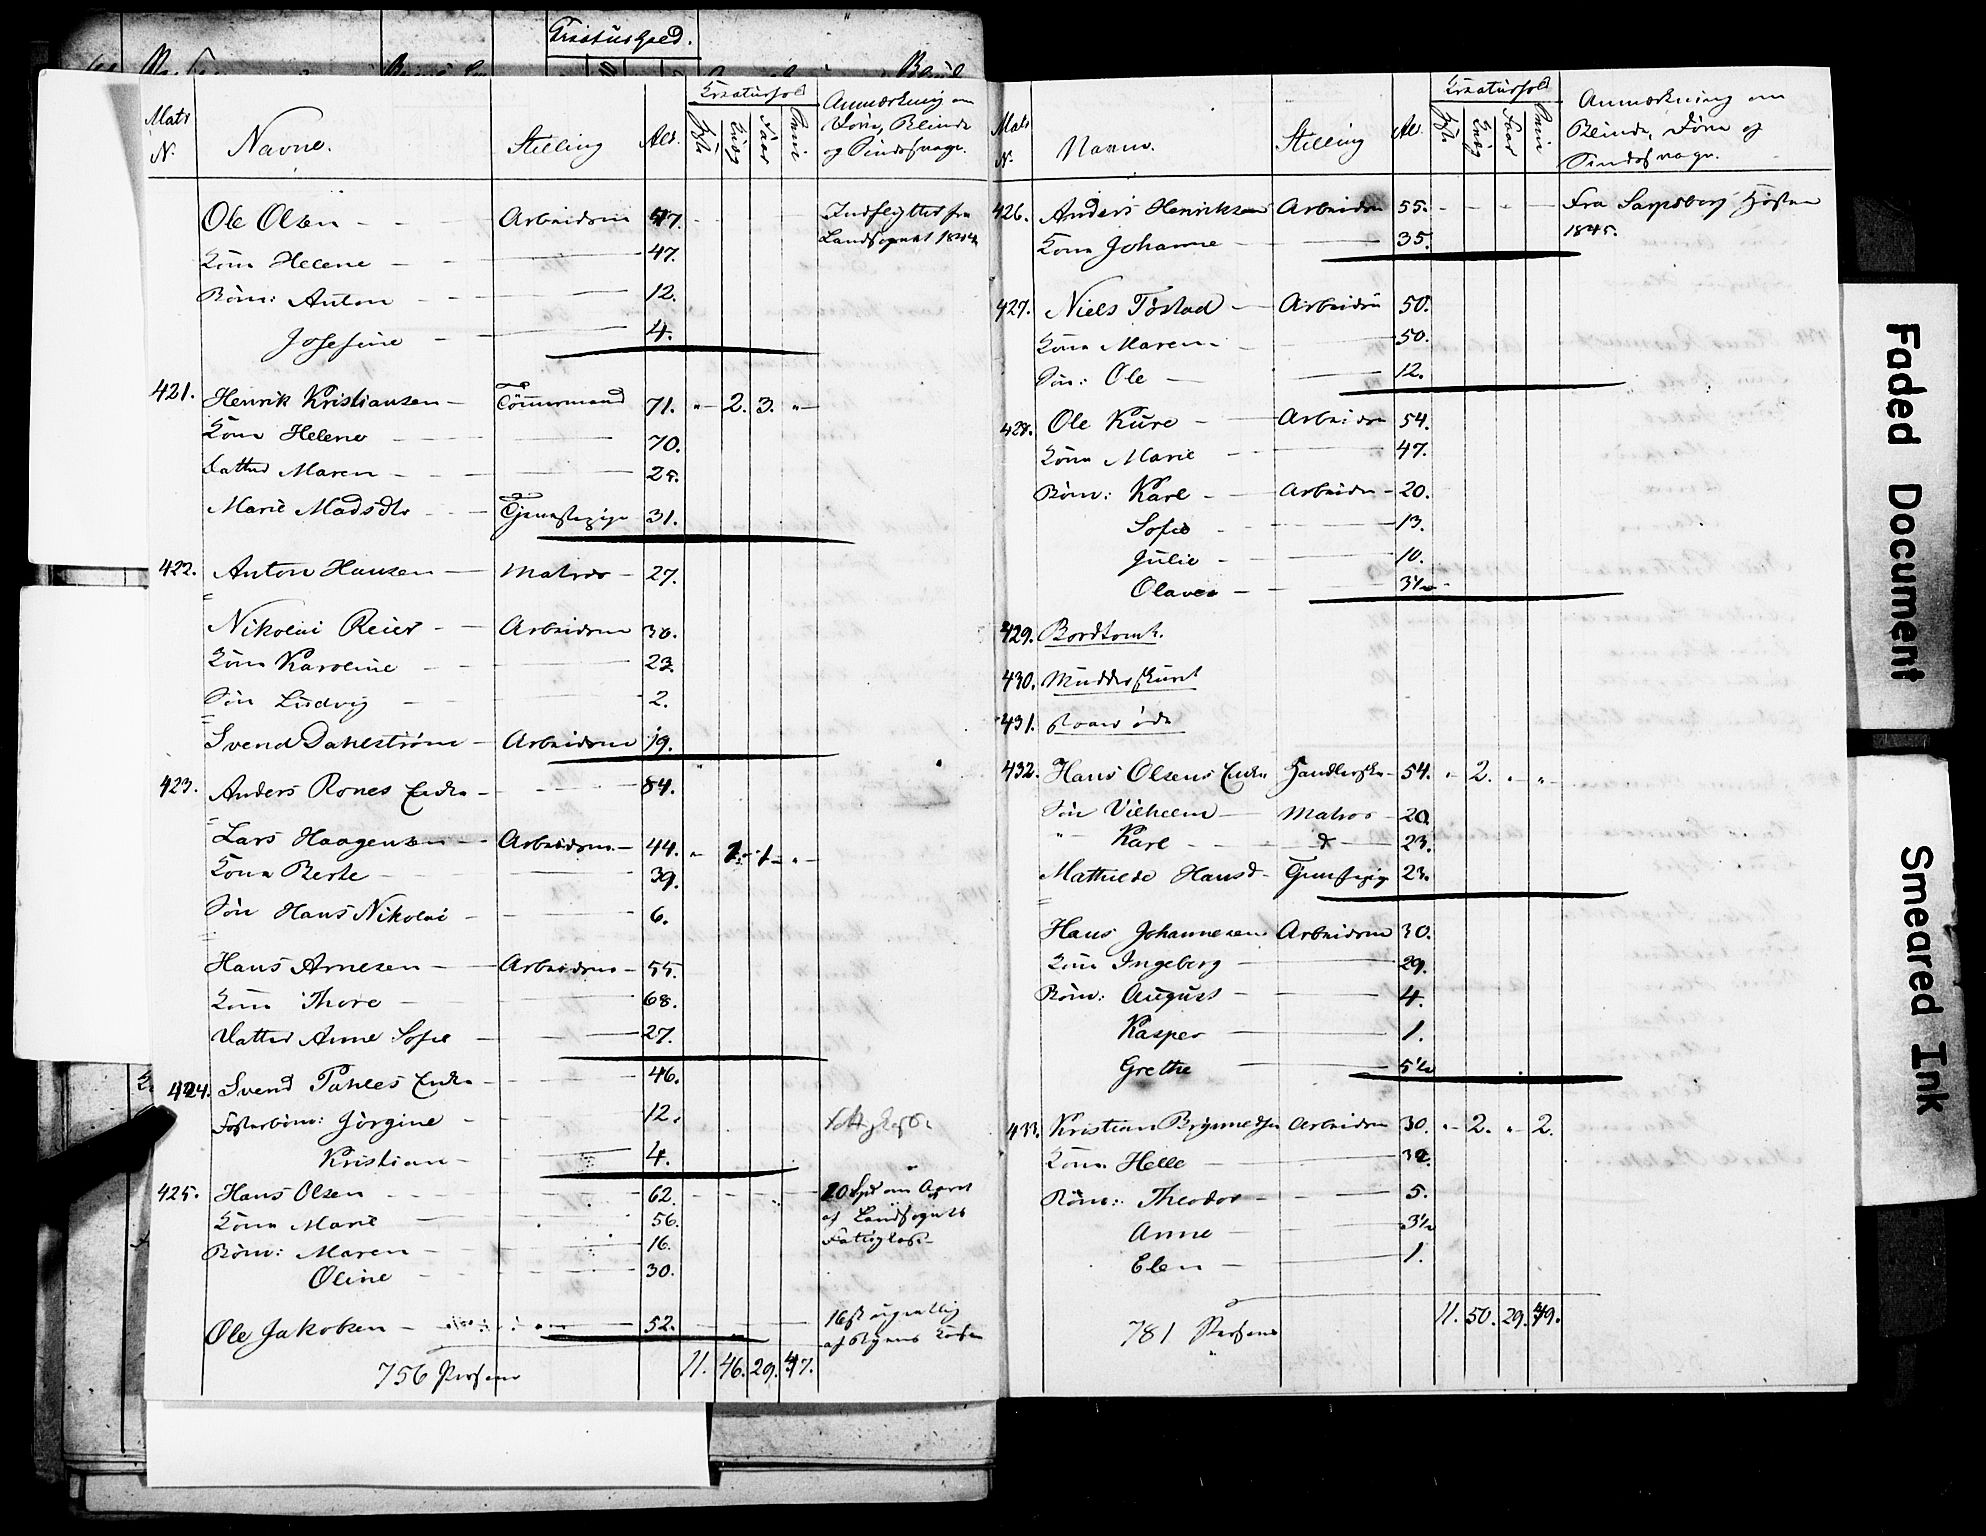 , Census 1845 for Moss/Moss, 1845, p. 67